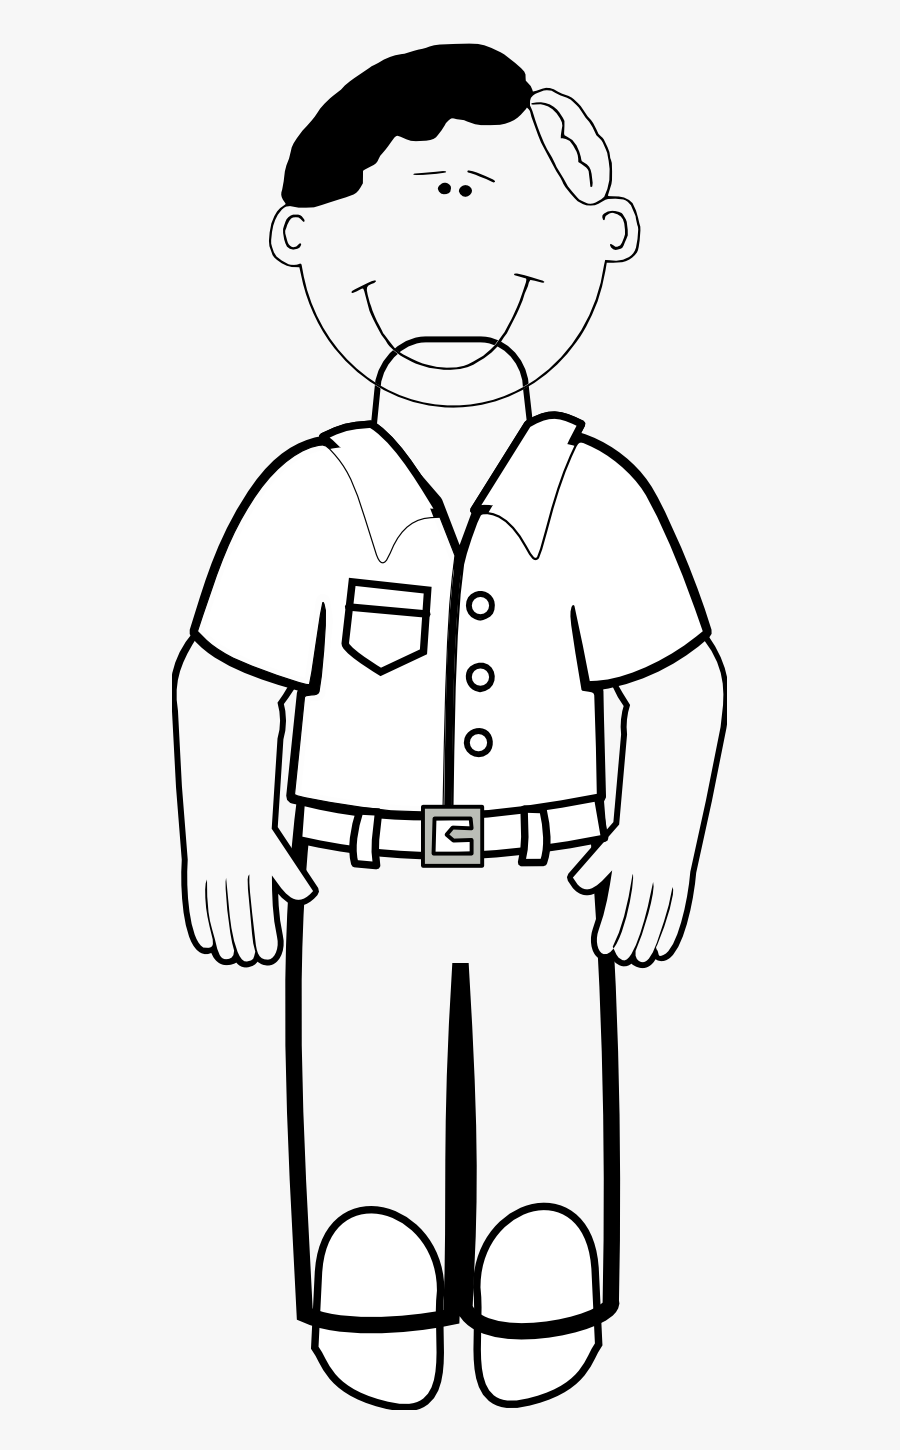 Clipart Of Father Black And White - Dad Clipart, Transparent Clipart